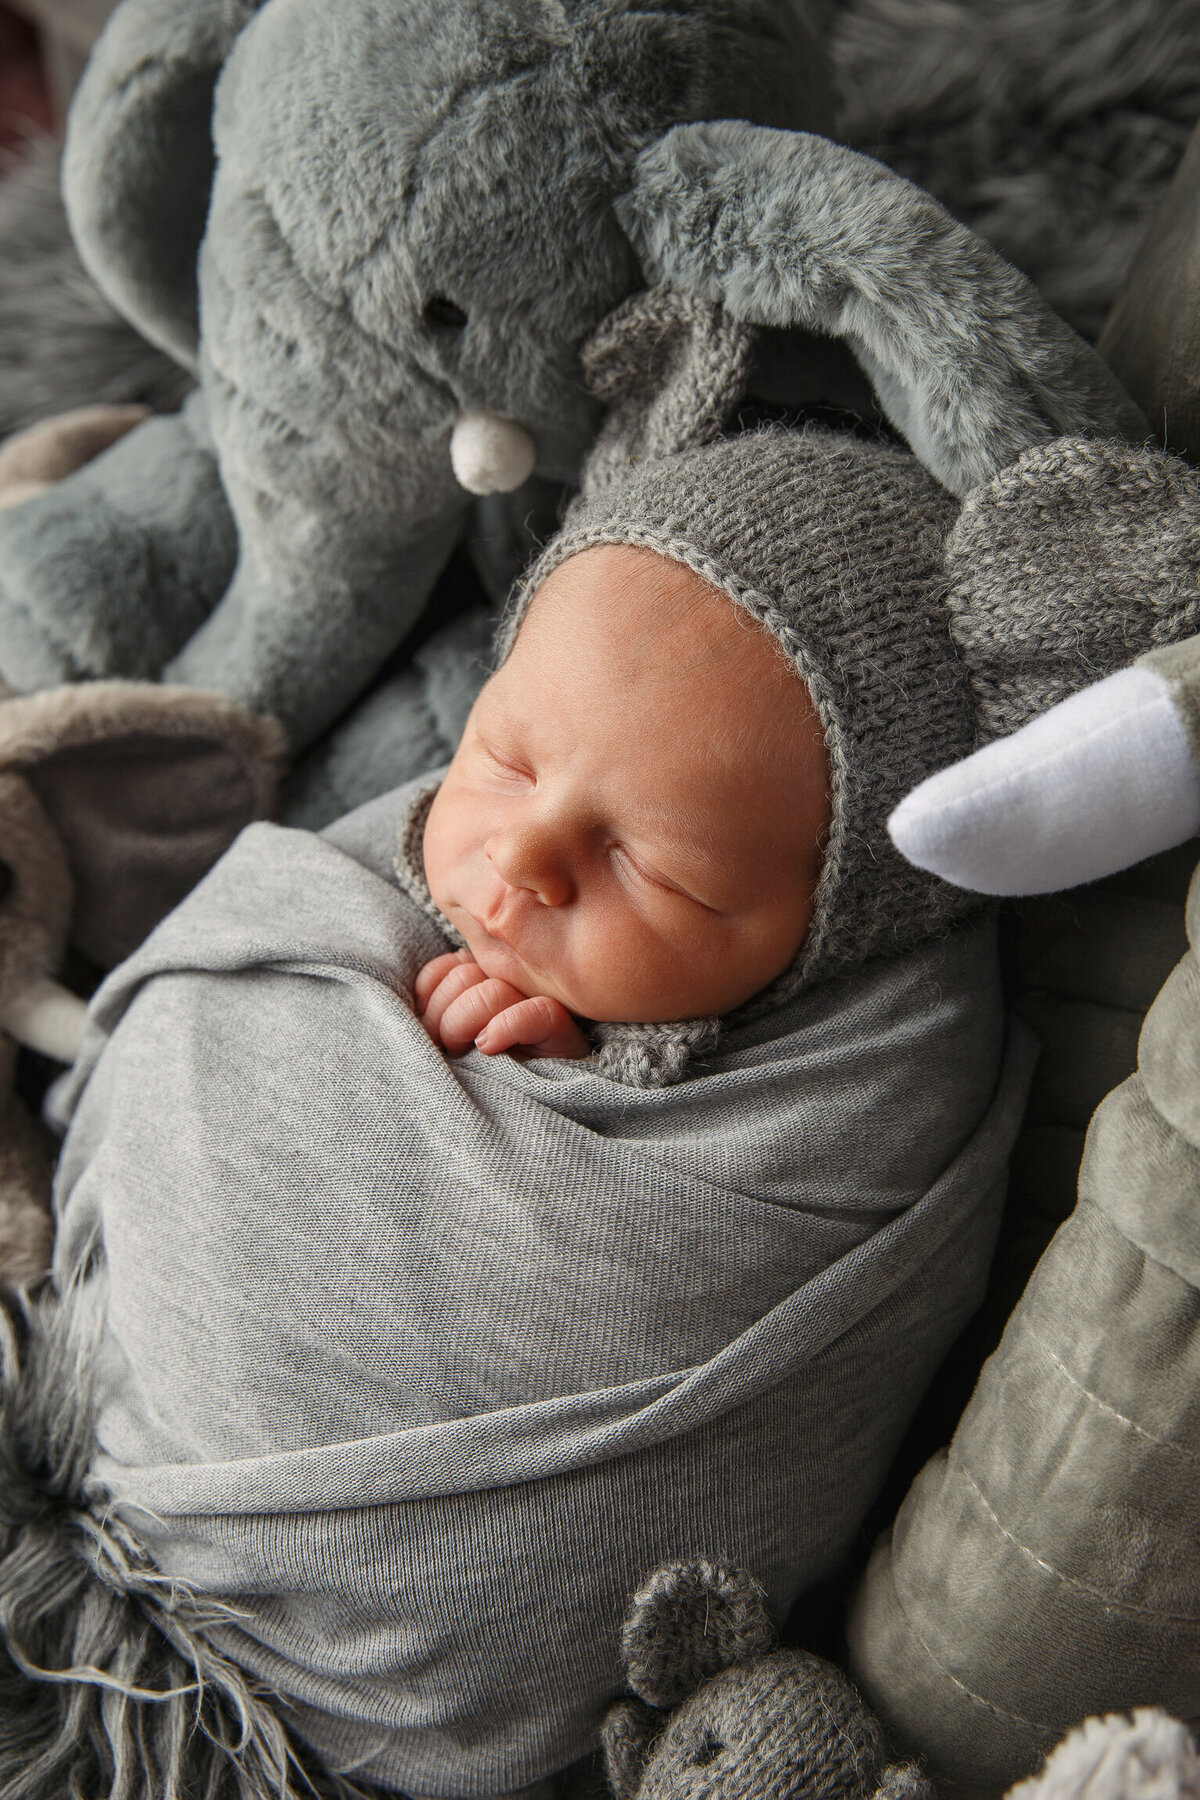 Cute new born wrapped in a gray blanket and resting with stuffed elephants